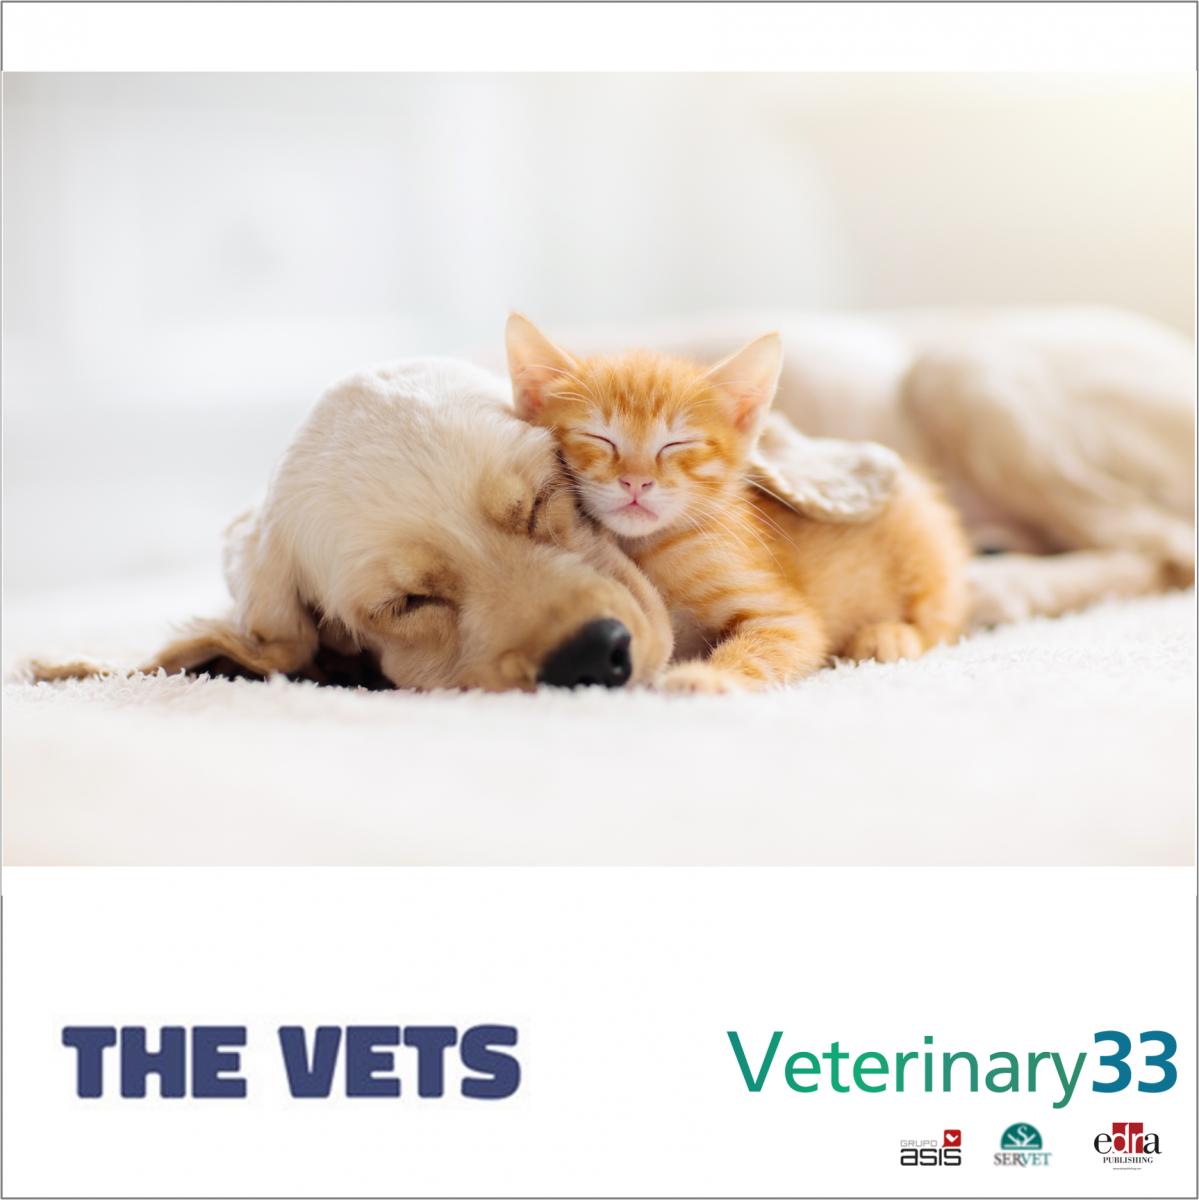  THE VETS SECURES  MILLION IN SEED FUNDING TO EMPOWER VETERINARIANS AND BRING HIGH-QUALITY PET CARE TO THE HOME 